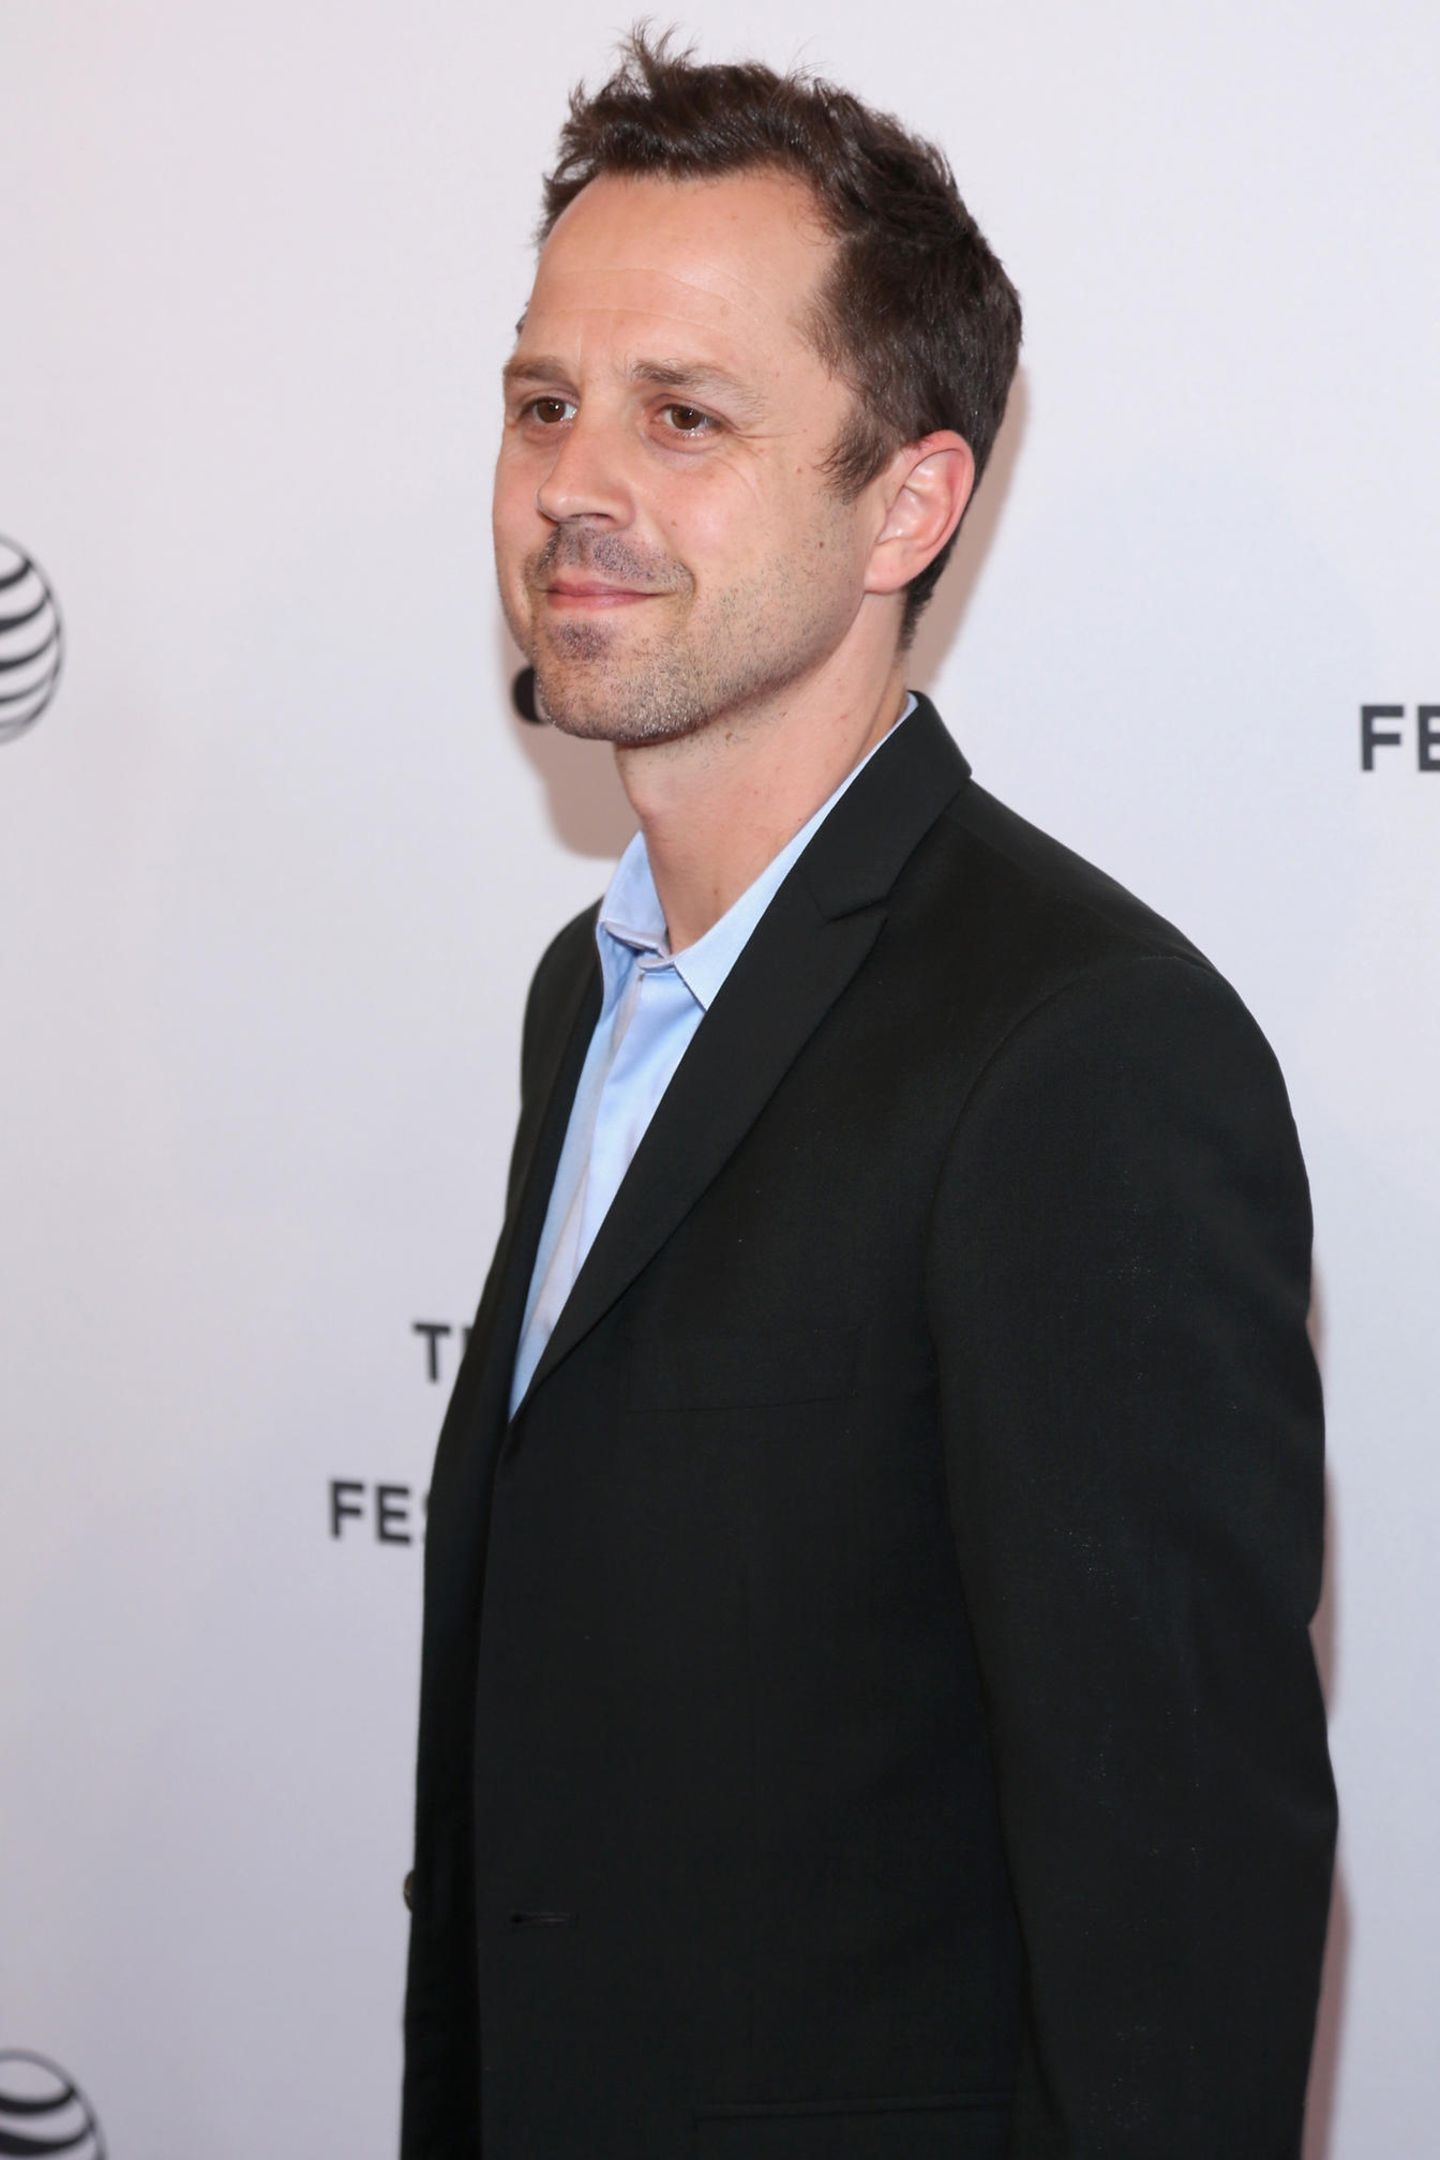 Giovanni Ribisi, Actor biography, News, Images, 1440x2160 HD Handy